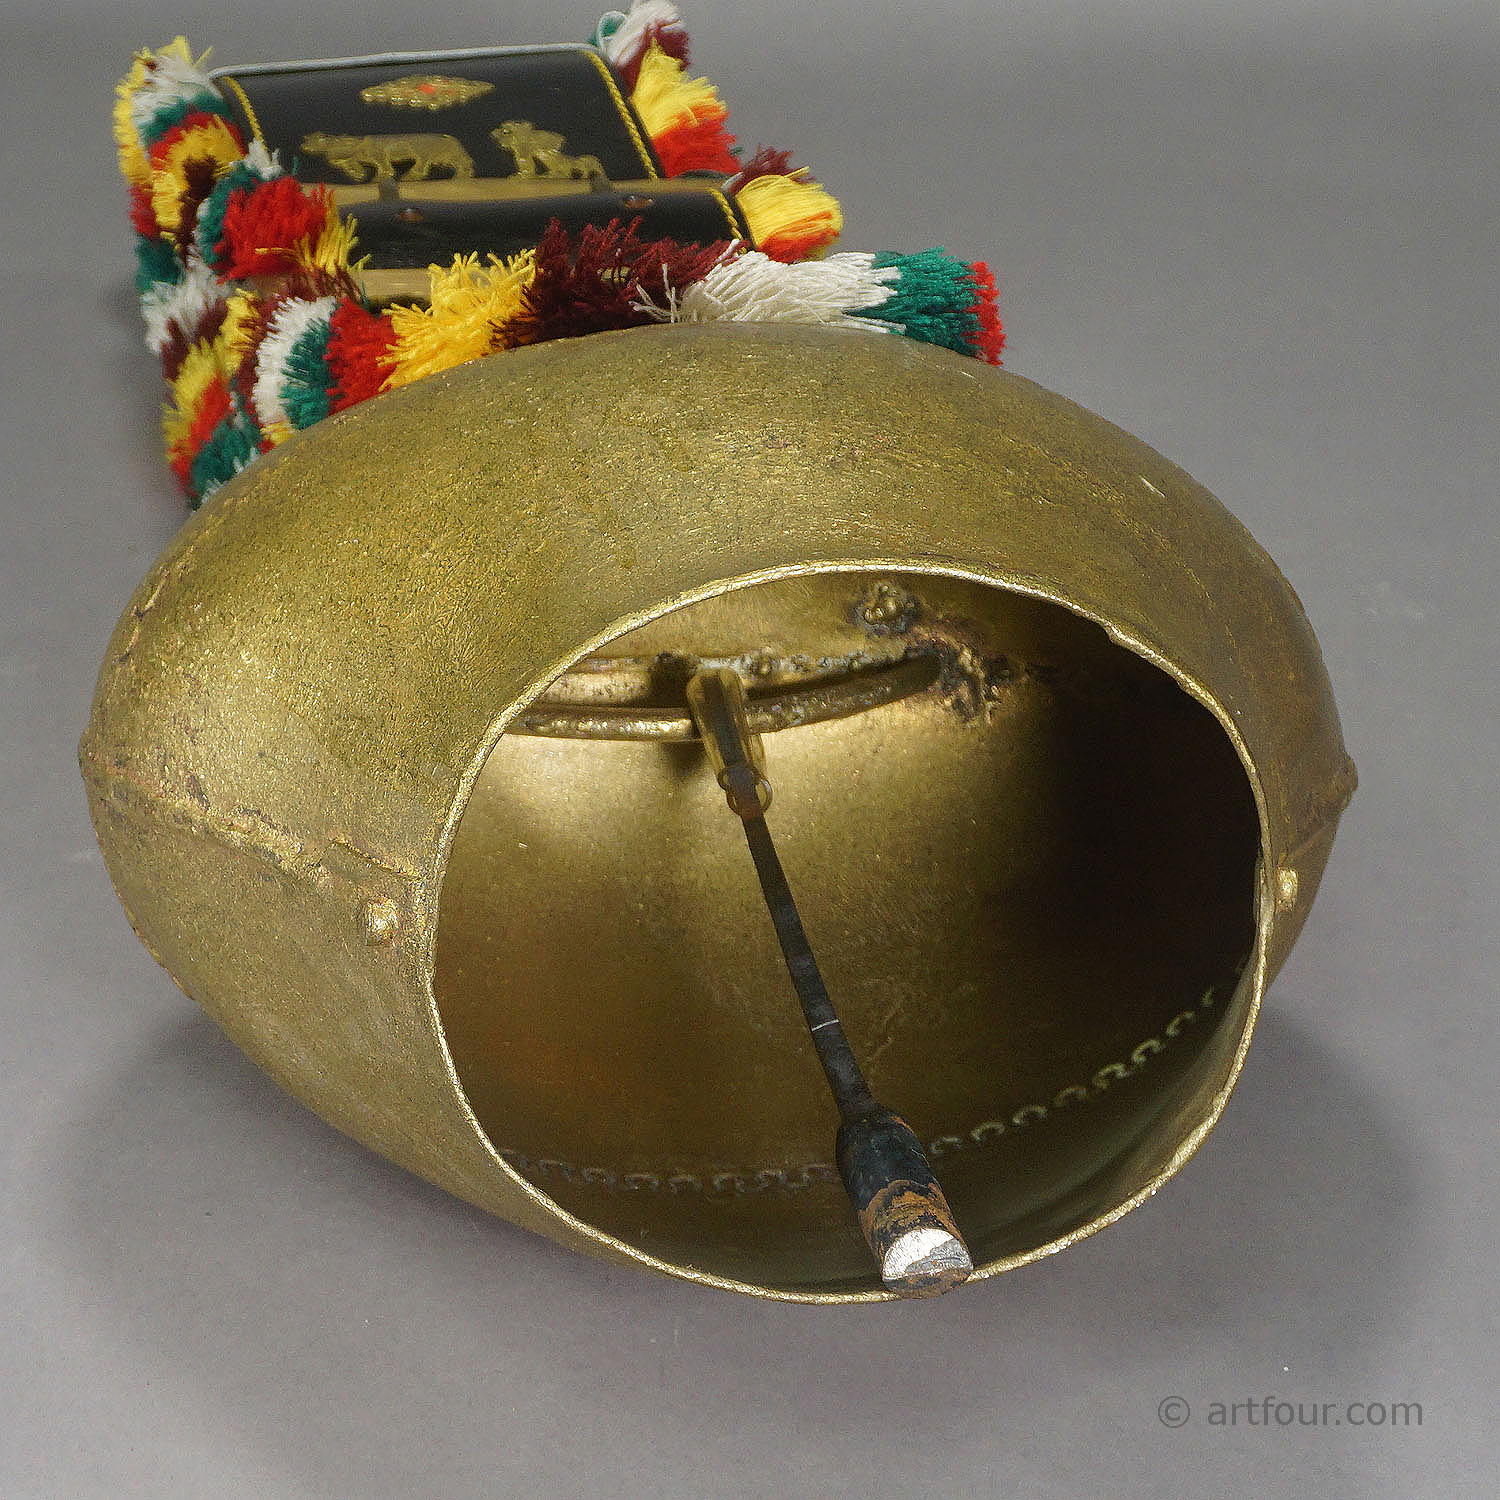 Vintage Swiss Handforged Cow Bell with Leather Strap ca. 1950